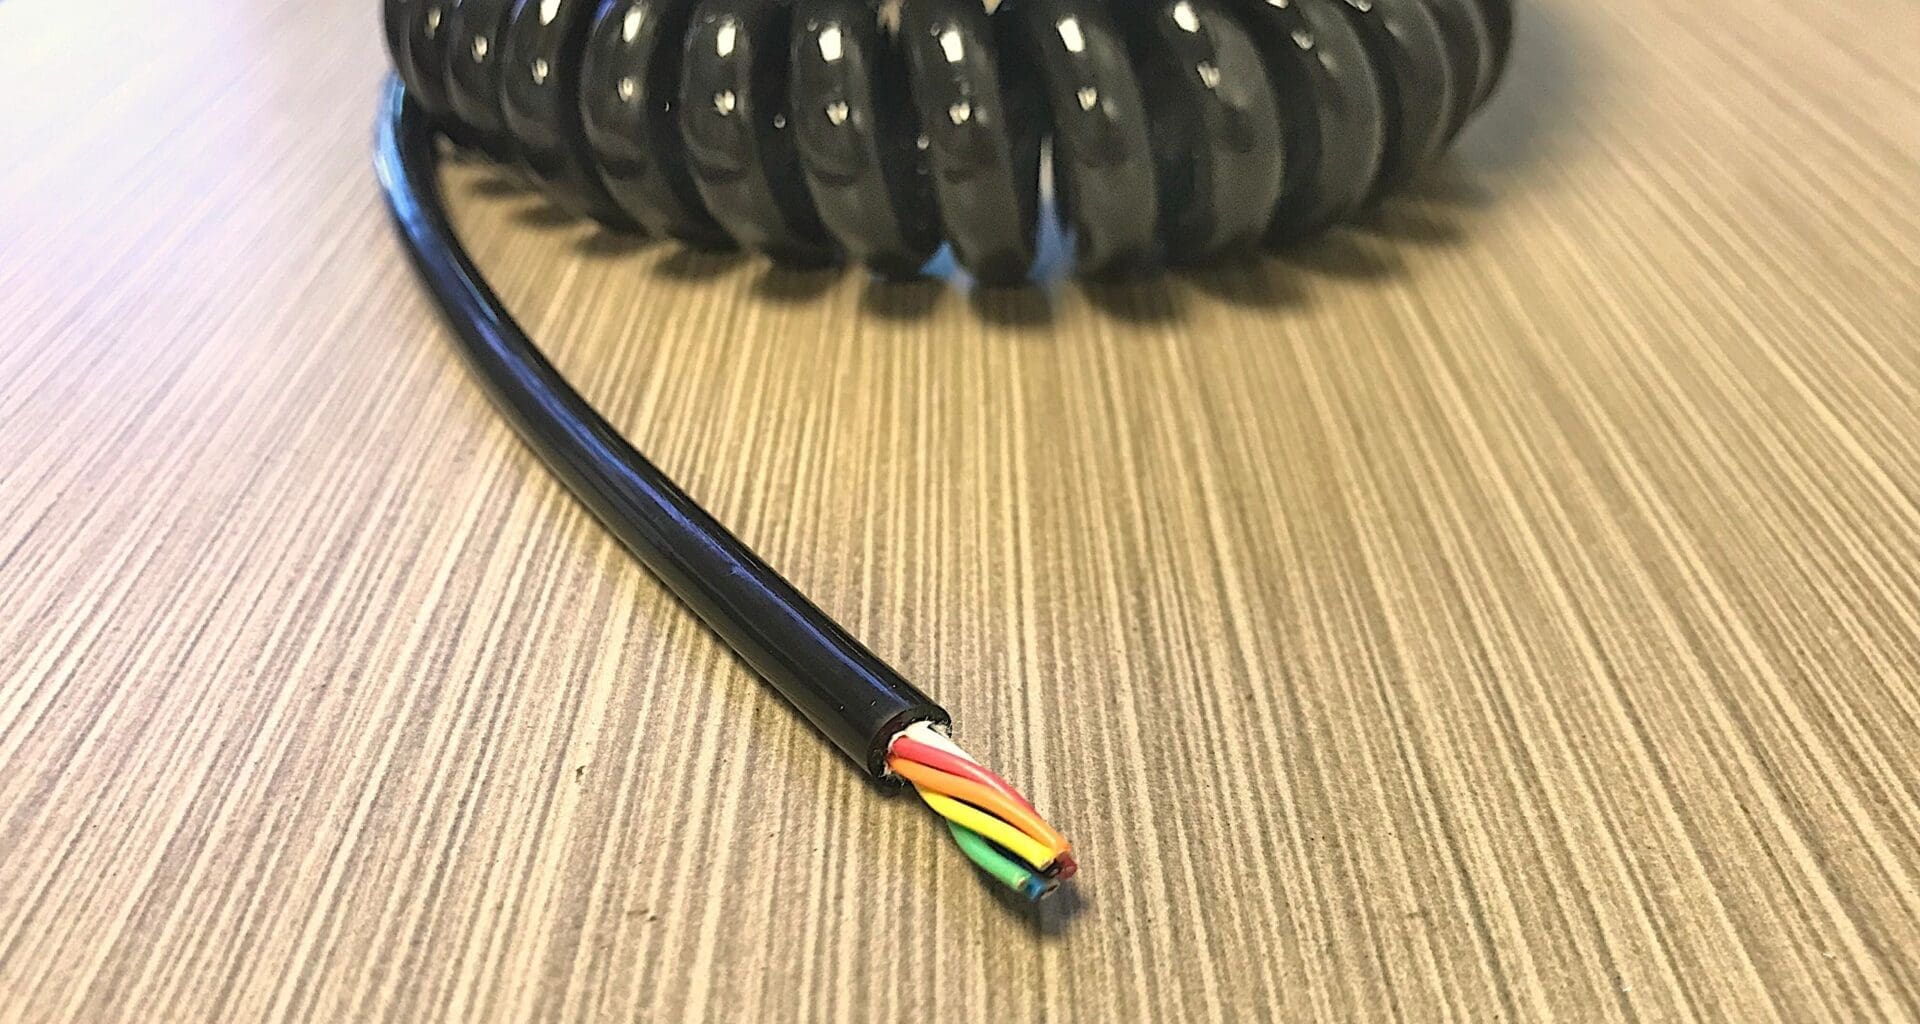 A black coiled cable on top of a table.